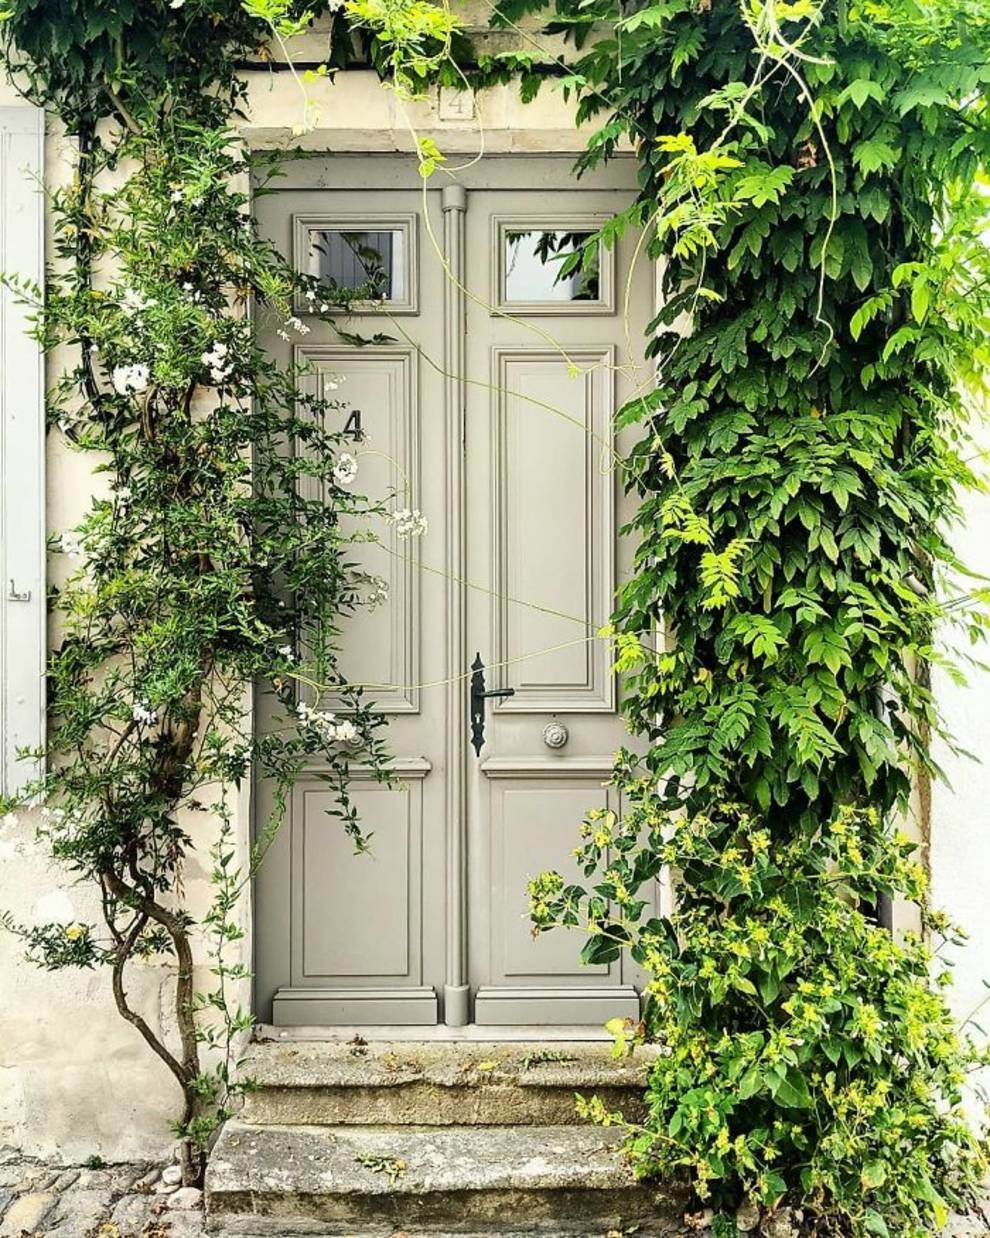 The British photographs the doors that look like from postcards (Photo)